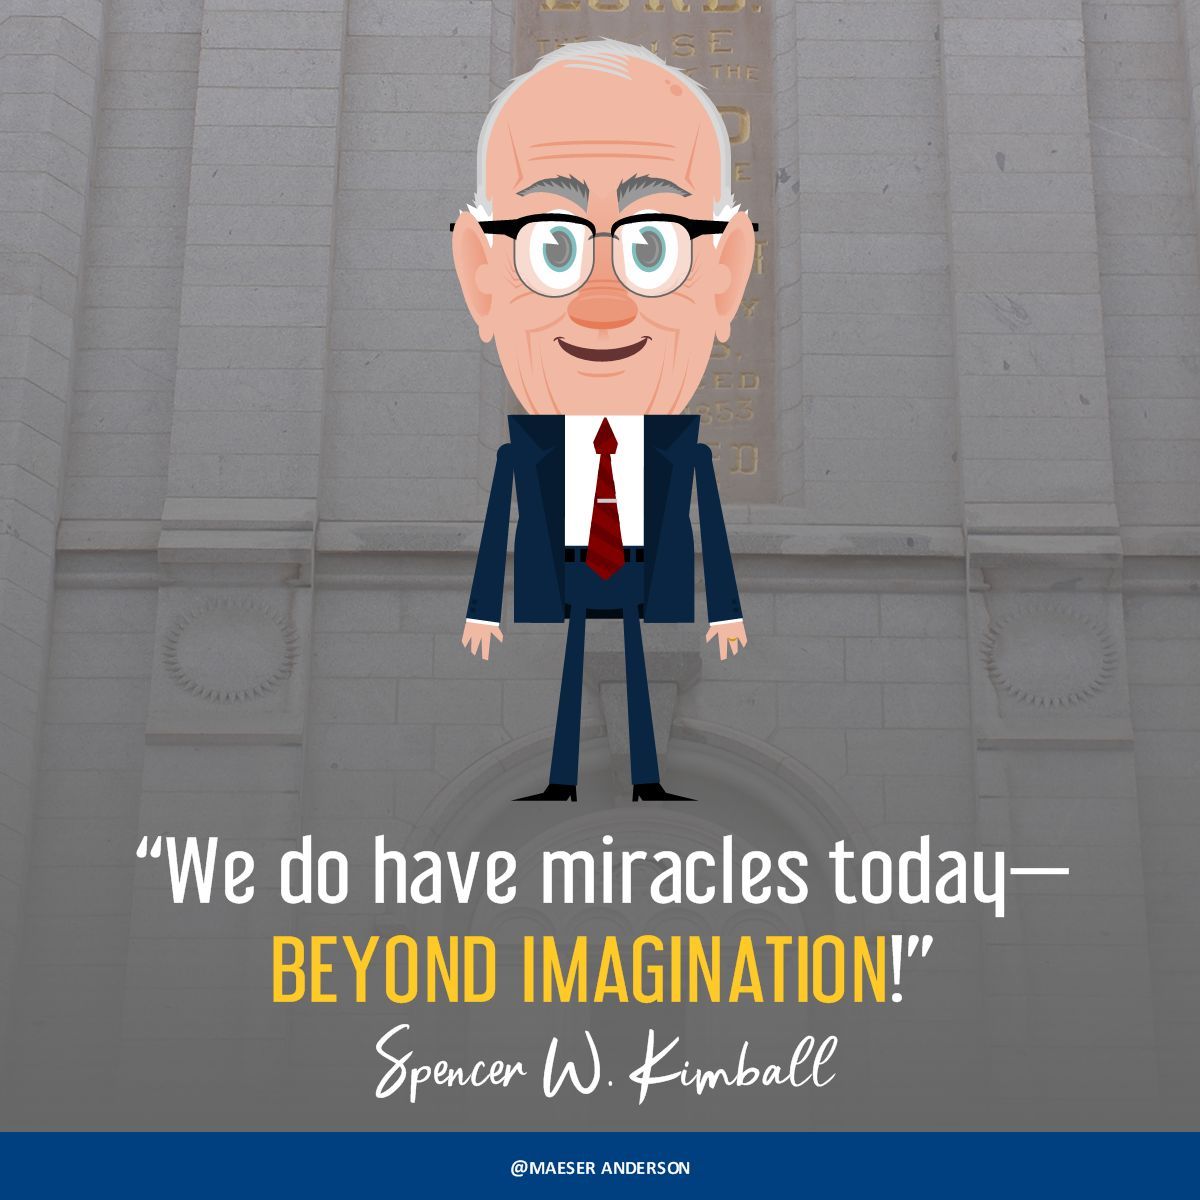 “We do have miracles today—beyond imagination!” - Spencer W. Kimball 
———
#generalconference #HearHim #JesusChrist #sharegoodness #ComeFollowMe #strivetobe #ldsconf